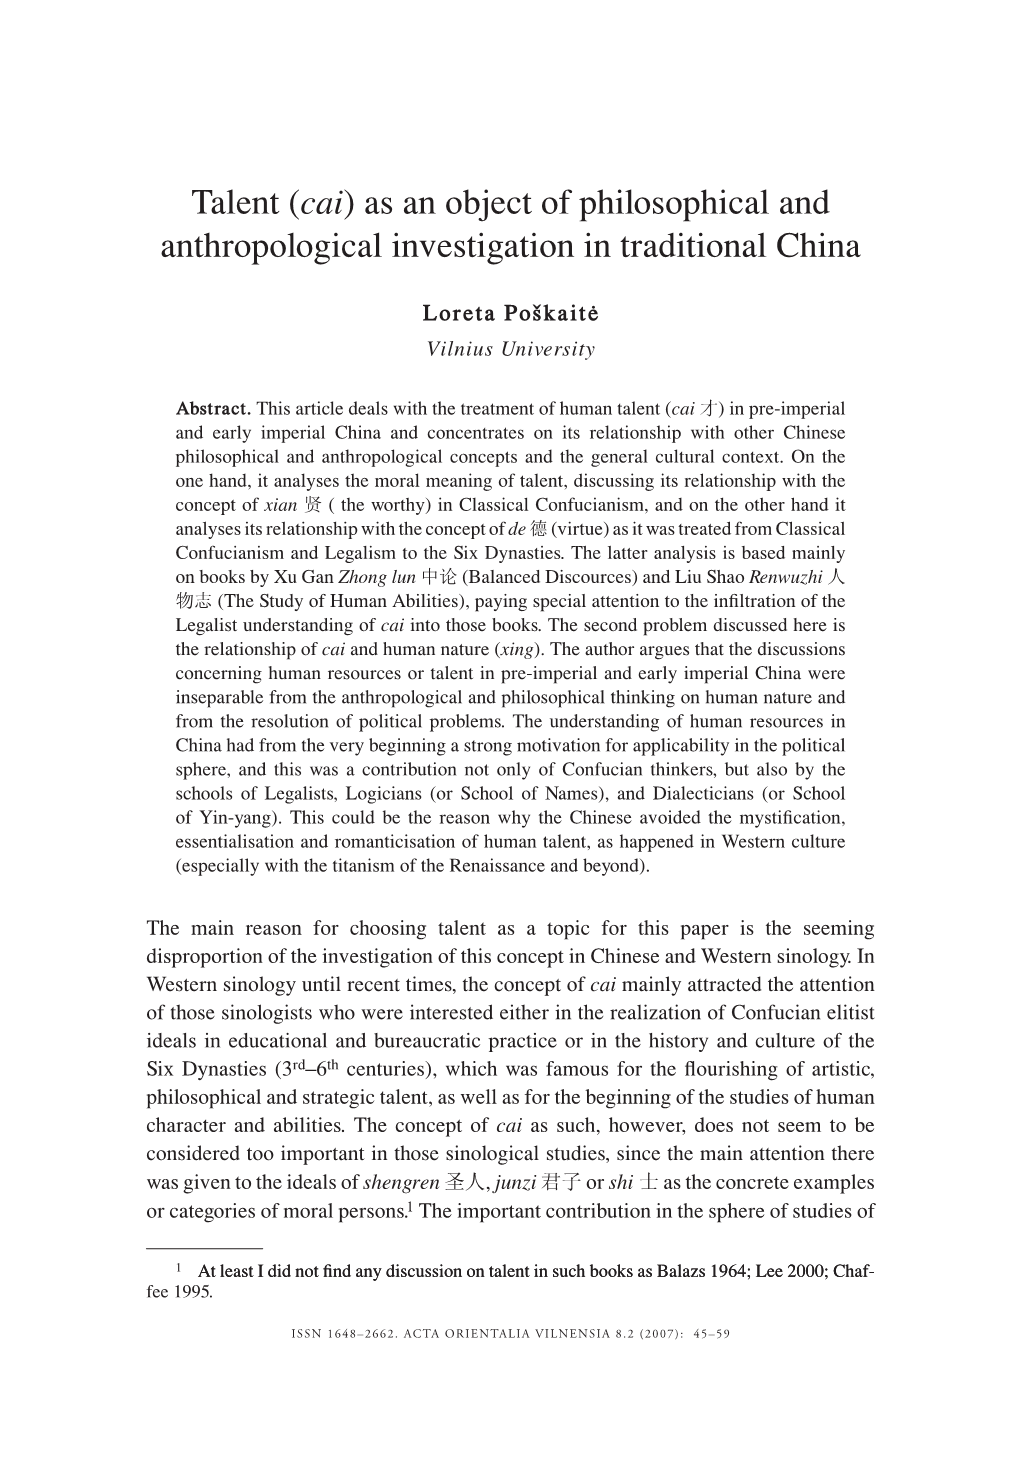 As an Object of Philosophical and Anthropological Investigation in Traditional China